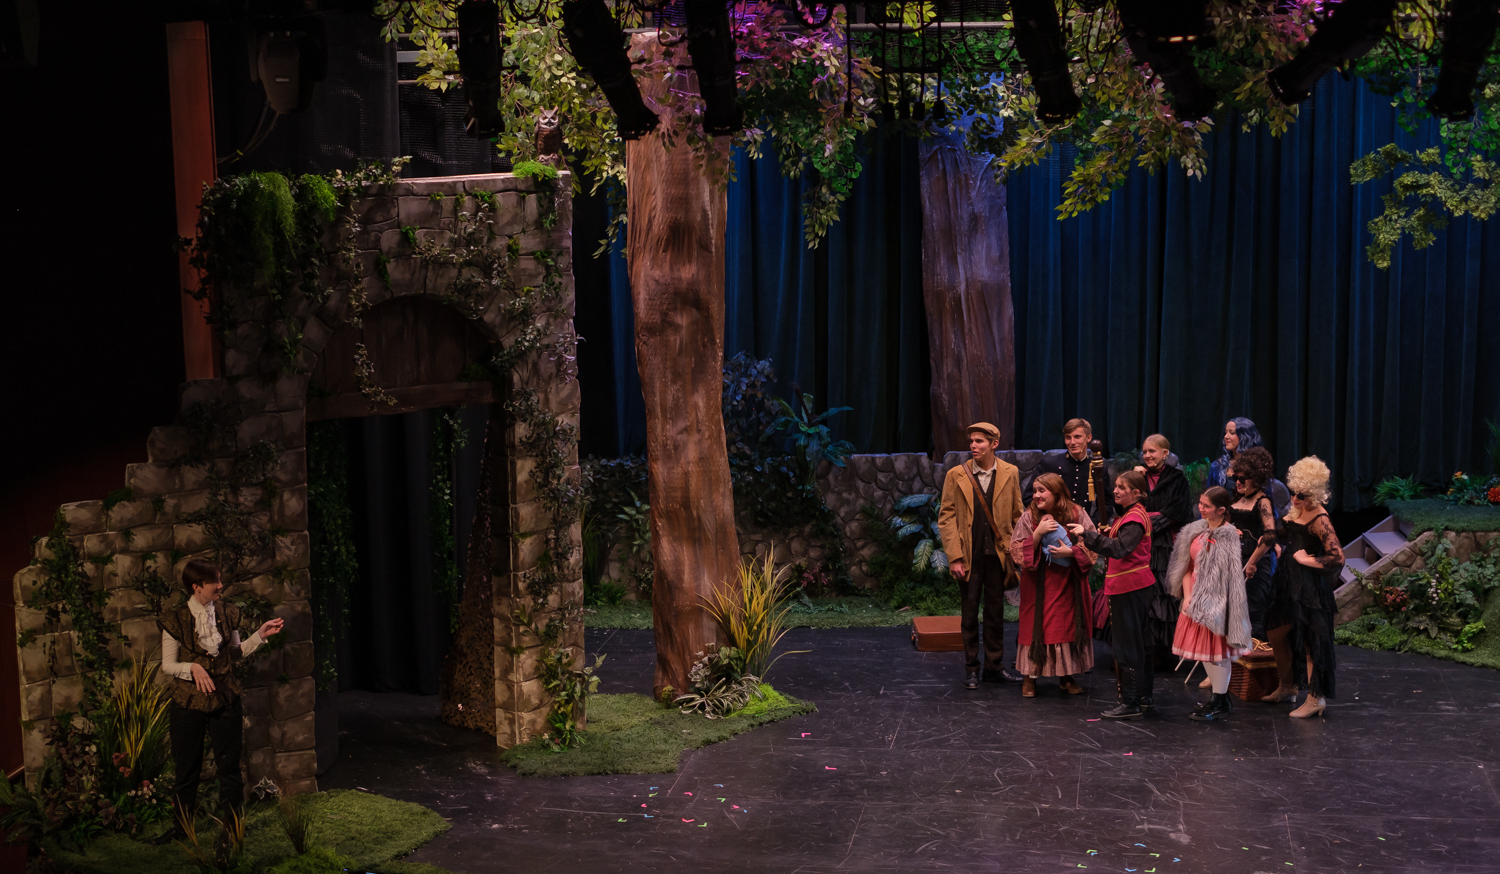 Students Perform Into The Woods at Skaneateles High School